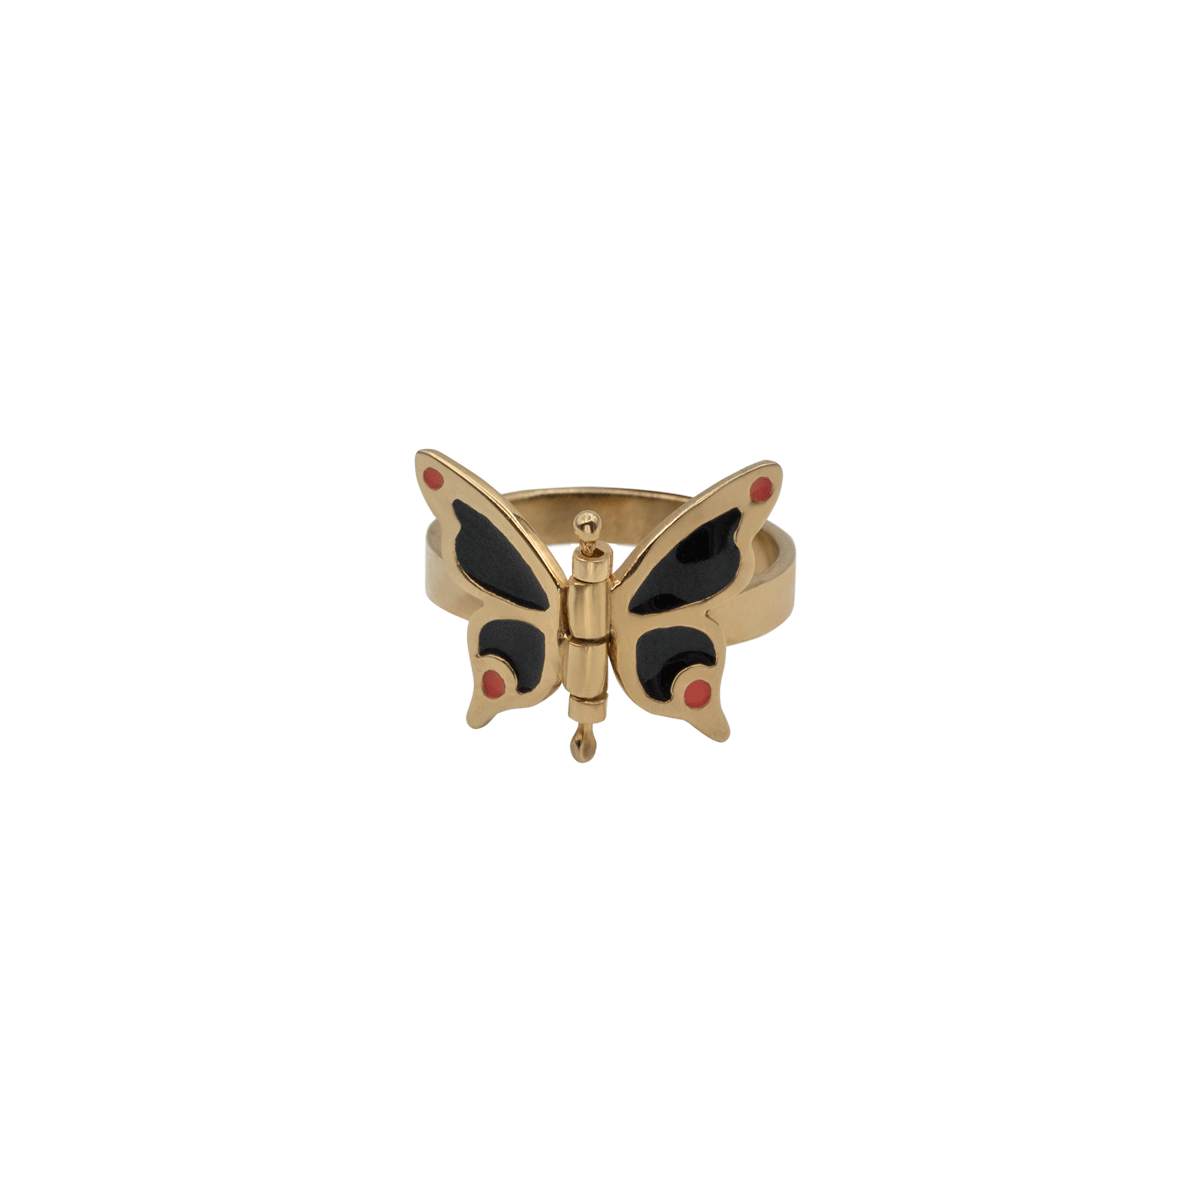 kinetic butterfly ring made in gold vermeil with enamel